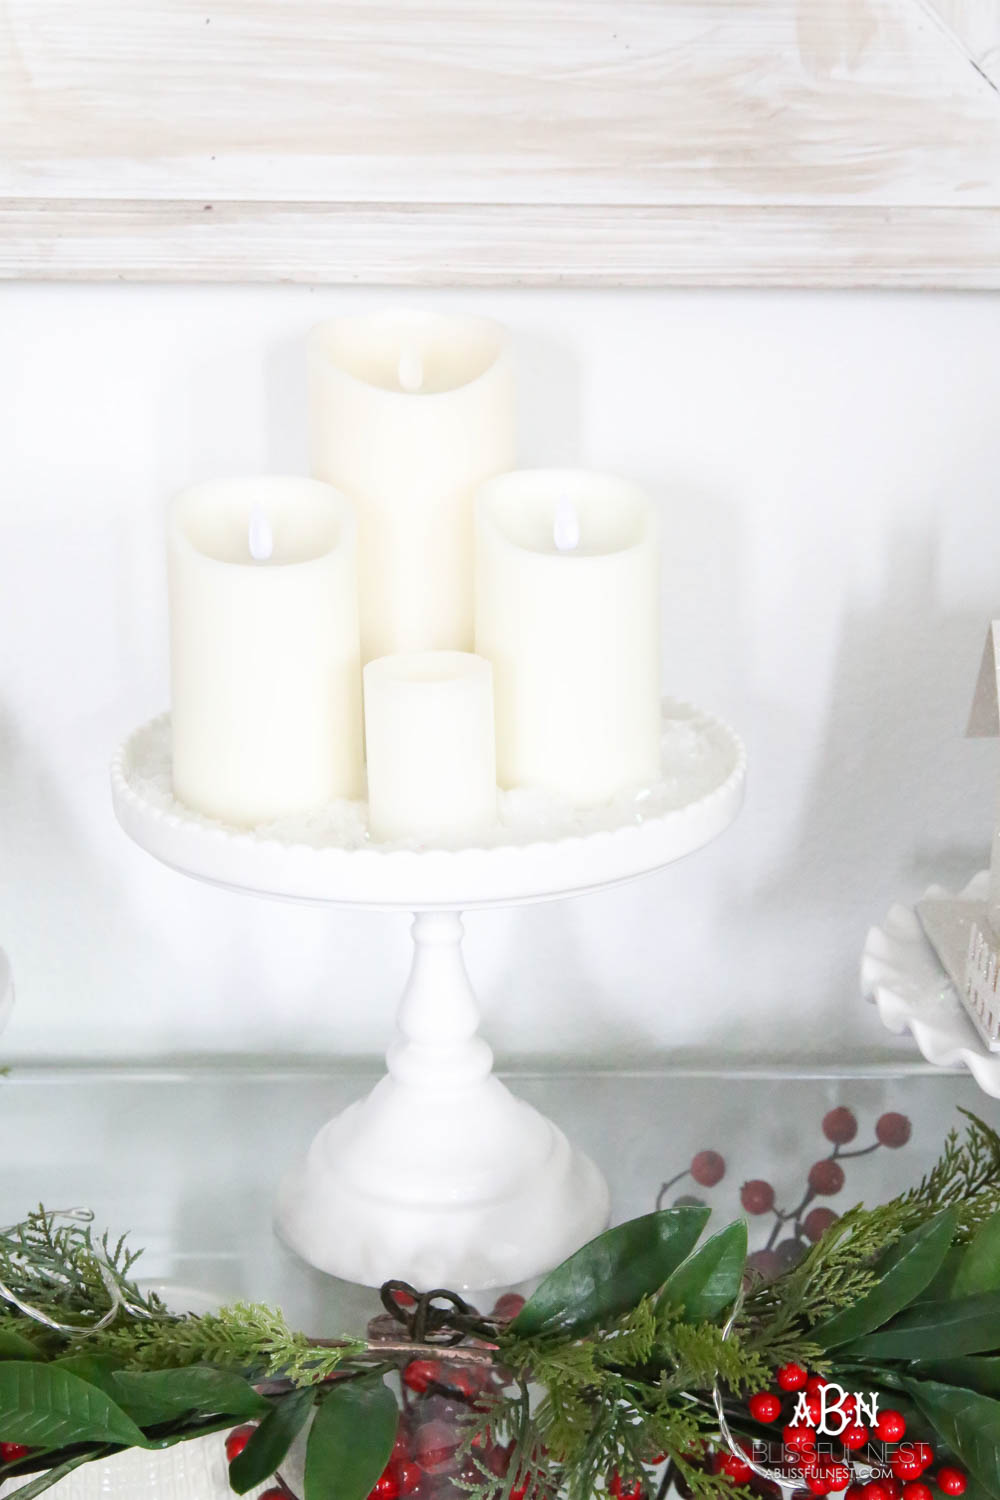 Use cake plates to add height to your display. I love the collection of candles and lighted glitter holiday houses sprinkled with snow for a beautiful simple classic Christmas look. #christmasentryway #christmasentry #christmasentrydecor #christmasentrywayideas #christmashometour